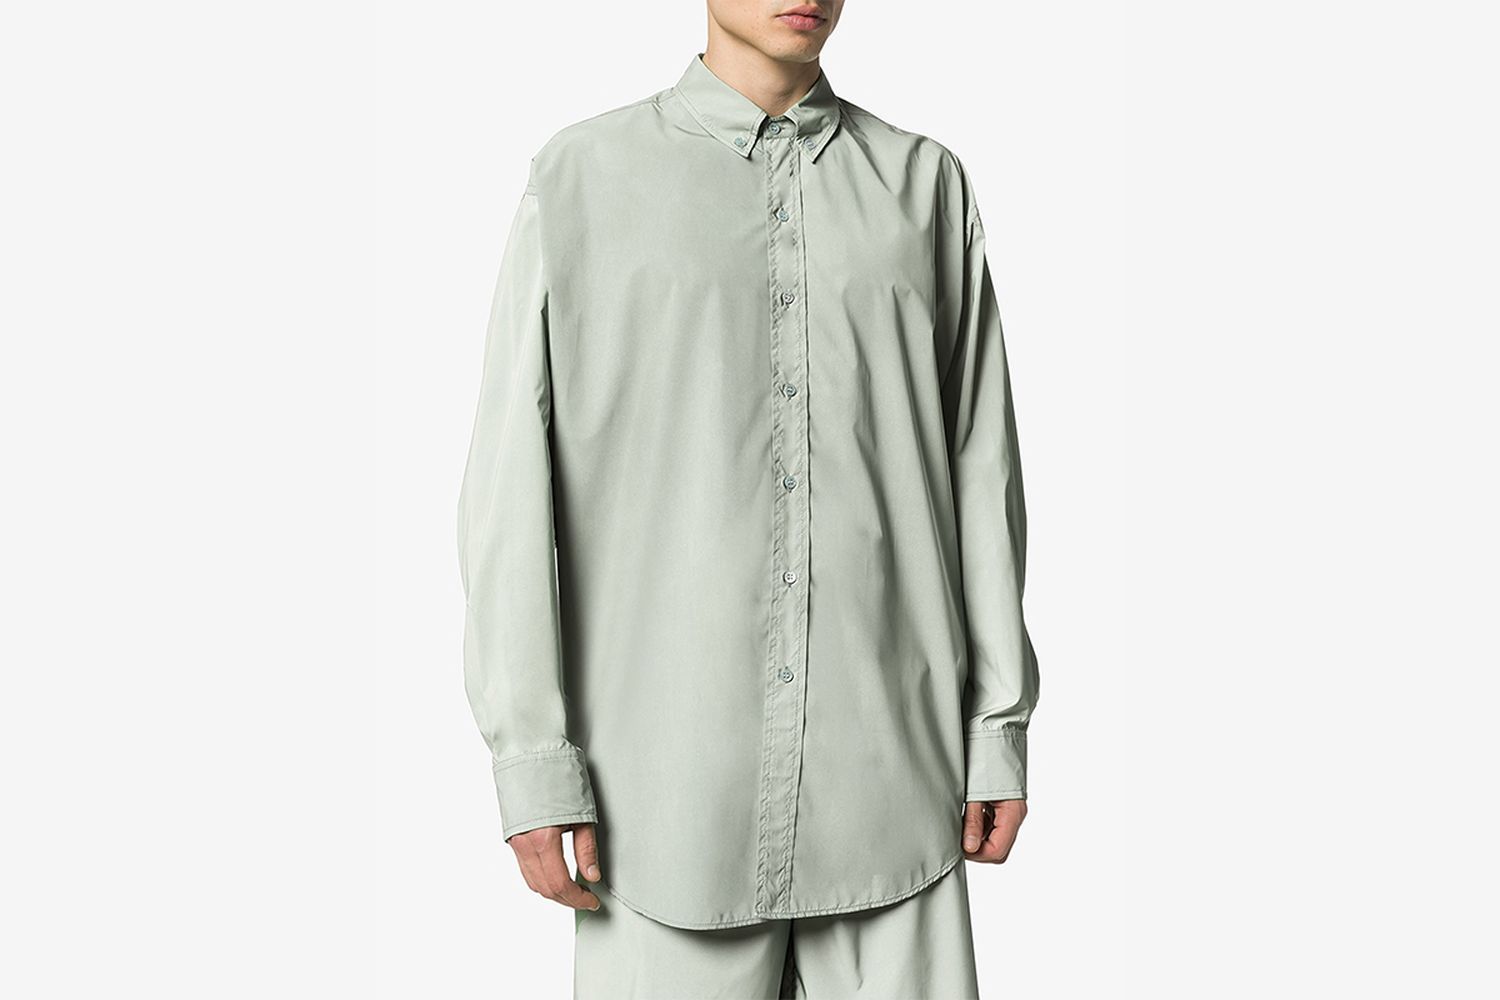 Anderson Reflective Oversized Shirt